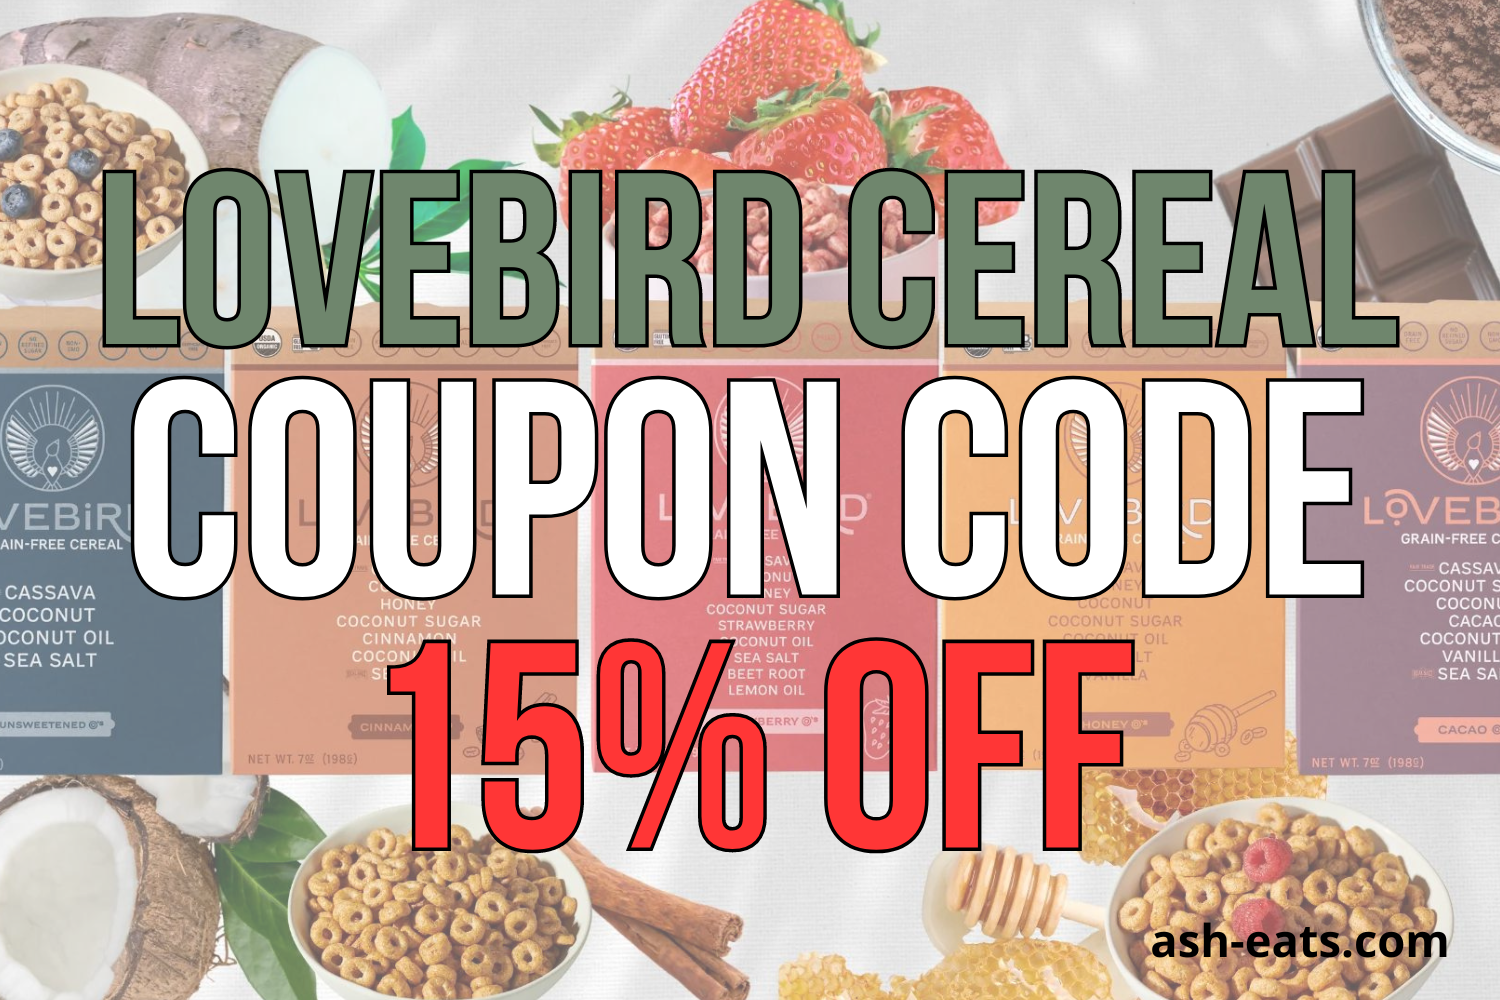 lovebird cereal coupon code